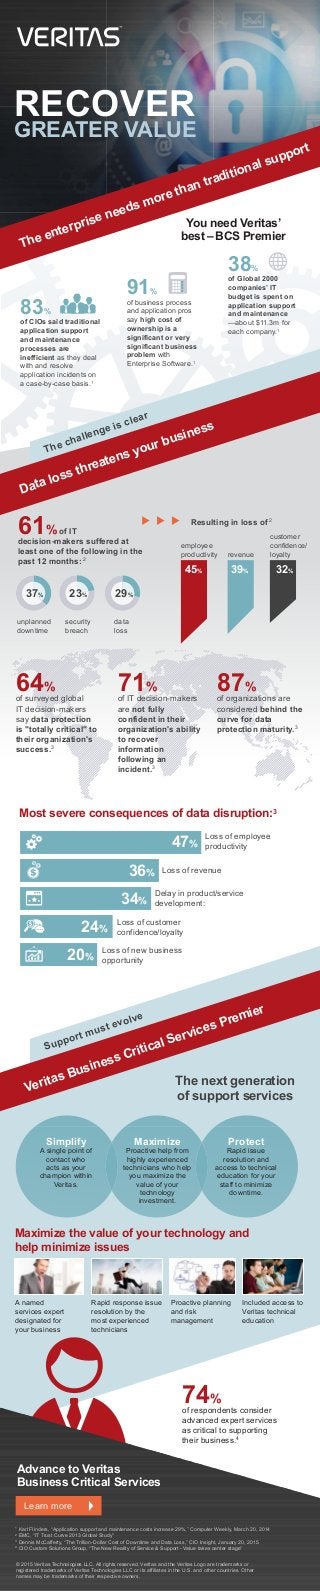 The enterprise needs more than traditional support
Data loss threatens your business
The challenge is clear
Figure 3
61% of IT
decision-makers suffered at
least one of the following in the
past 12 months: 2
Resulting in loss of 2
45% 39% 32%
employee
productivity
unplanned
downtime
security
breach
data
loss
revenue
customer
confidence/
loyalty
37% 23% 29%
71%
of IT decision-makers
are not fully
confident in their
organization's ability
to recover
information
following an
incident.3
Most severe consequences of data disruption:3
64%
of surveyed global
IT decision-makers
say data protection
is "totally critical" to
their organization's
success.3
87%
of organizations are
considered behind the
curve for data
protection maturity.3
Loss of new business
opportunity
Loss of employee
productivity
Loss of revenue
Delay in product/service
development:
Loss of customer
confidence/loyalty
47%
36%
34%
24%
20%
RECOVER
GREATER VALUE
91%
of business process
and application pros
say high cost of
ownership is a
significant or very
significant business
problem with
Enterprise Software.1
83%
of CIOs said traditional
application support
and maintenance
processes are
inefficient as they deal
with and resolve
application incidents on
a case-by-case basis.1
38%
of Global 2000
companies’ IT
budget is spent on
application support
and maintenance
—about $11.3m for
each company.1
You need Veritas’
best – BCS Premier
Veritas Business Critical Services Premier
© 2015 Veritas Technologies LLC. All rights reserved. Veritas and the Veritas Logo are trademarks or
registered trademarks of Veritas Technologies LLC or its affiliates in the U.S. and other countries. Other
names may be trademarks of their respective owners.
Learn more
Simplify
A single point of
contact who
acts as your
champion within
Veritas.
Maximize
Proactive help from
highly experienced
technicians who help
you maximize the
value of your
technology
investment.
Protect
Rapid issue
resolution and
access to technical
education for your
staff to minimize
downtime.
Advance to Veritas
Business Critical Services
Maximize the value of your technology and
help minimize issues
The next generation
of support services
A named
services expert
designated for
your business
Rapid response issue
resolution by the
most experienced
technicians
Proactive planning
and risk
management
Included access to
Veritas technical
education
74%
of respondents consider
advanced expert services
as critical to supporting
their business.4
1
Karl Flinders, “Application support and maintenance costs increase 29%,” Computer Weekly, March 20, 2014
2
EMC, “IT Trust Curve 2013 Global Study”
3
Dennis McCafferty, “The Trillion-Dollar Cost of Downtime and Data Loss,” CIO Insight, January 20, 2015
4
CIO Custom Solutions Group, “The New Reality of Service & Support - Value takes center stage”
Support must evolve
 